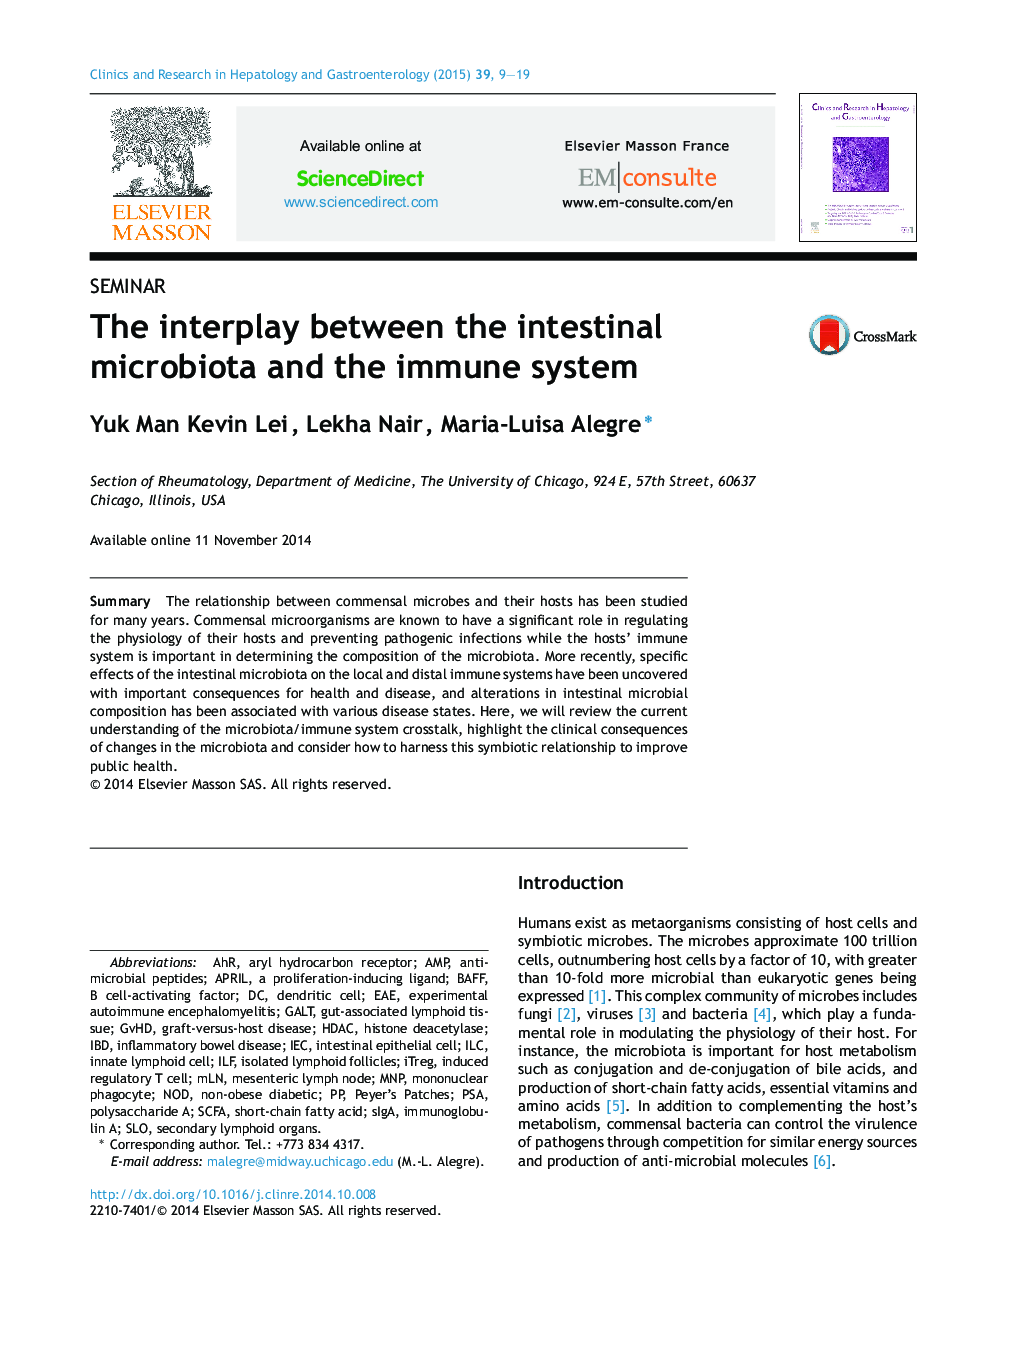 The interplay between the intestinal microbiota and the immune system